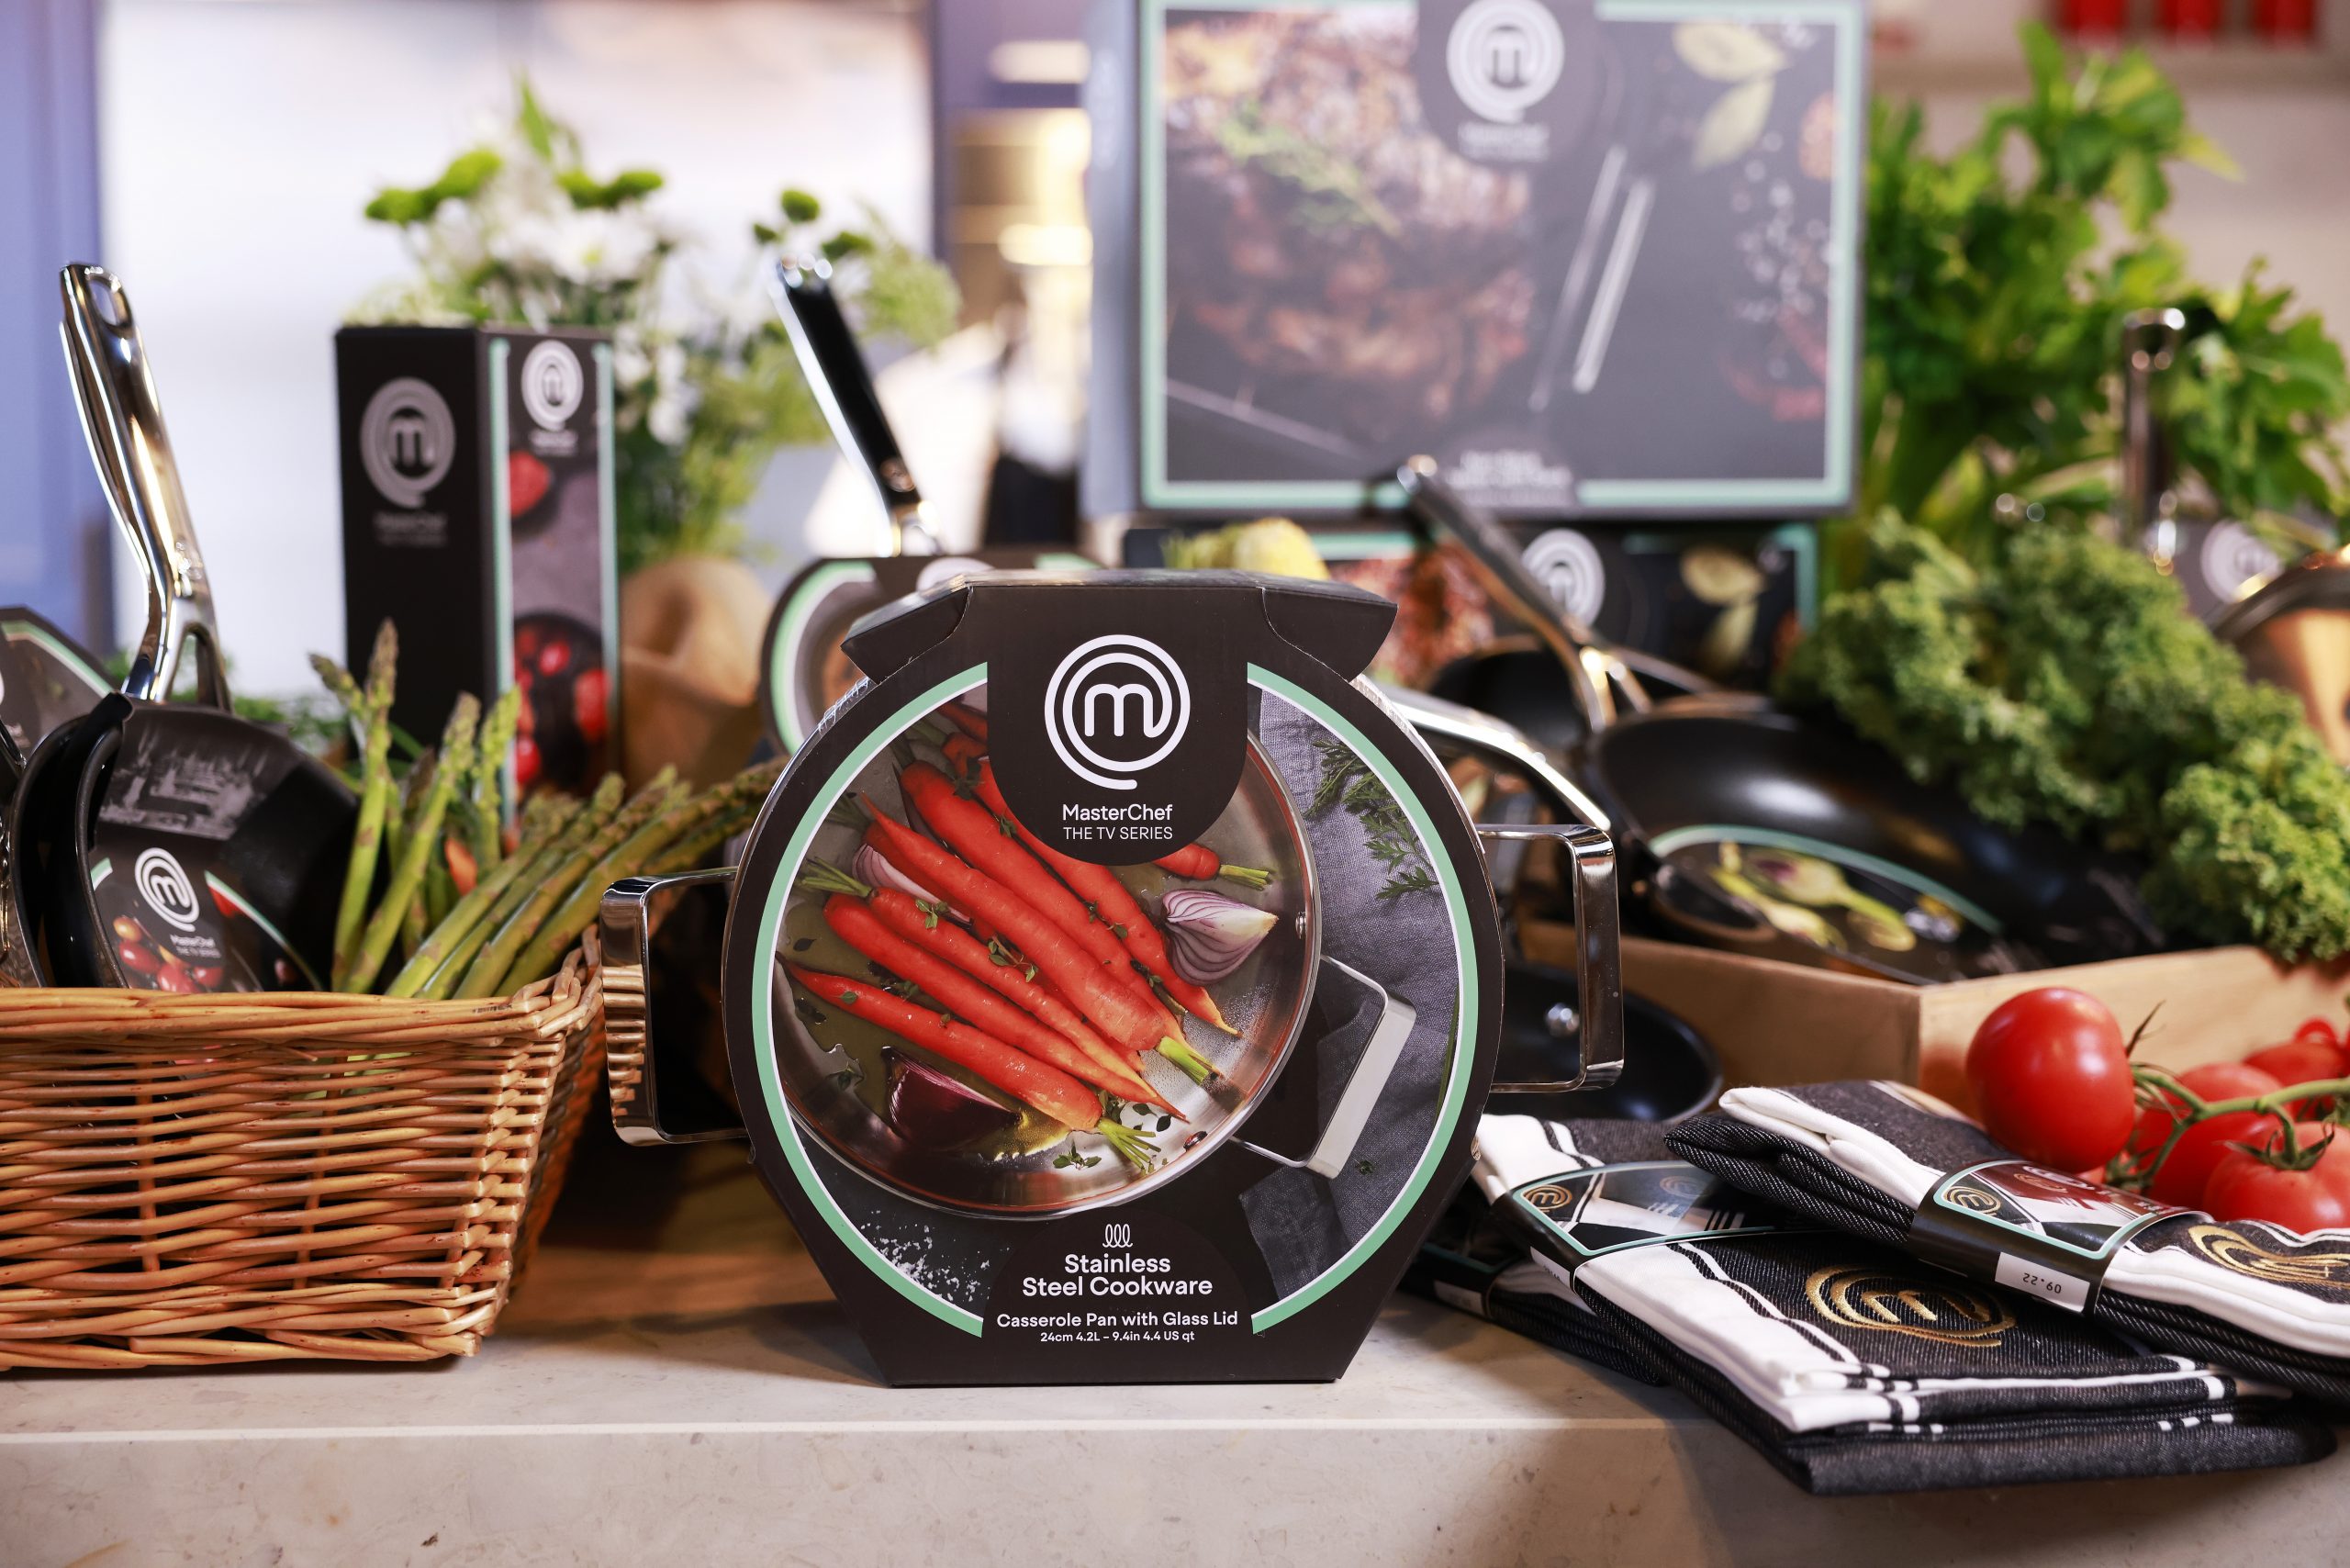 Coles unveils MasterChef-approved cookware so you can take your home  cooking up a notch! But are they worth the hype?